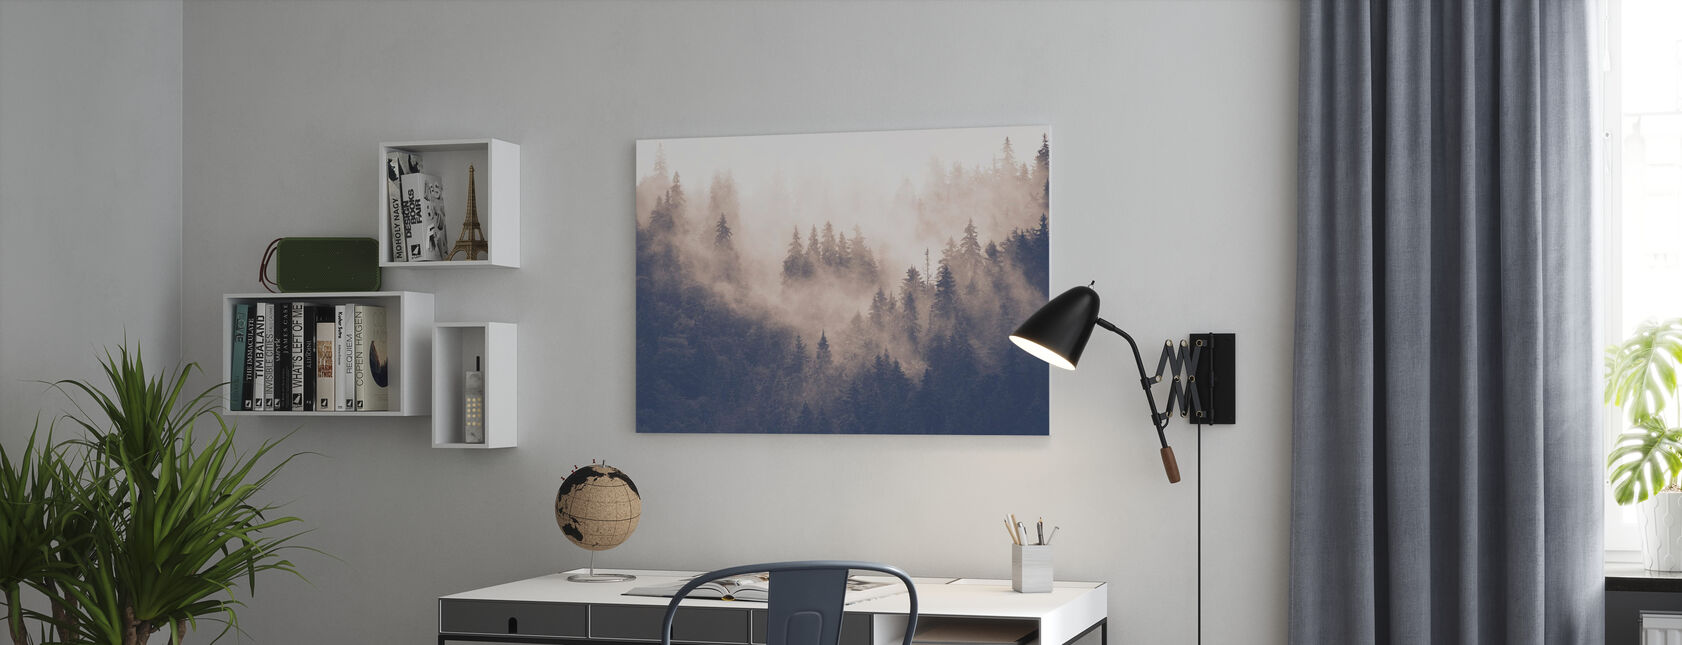 Foggy Forest - Vintage - Canvas print - Office